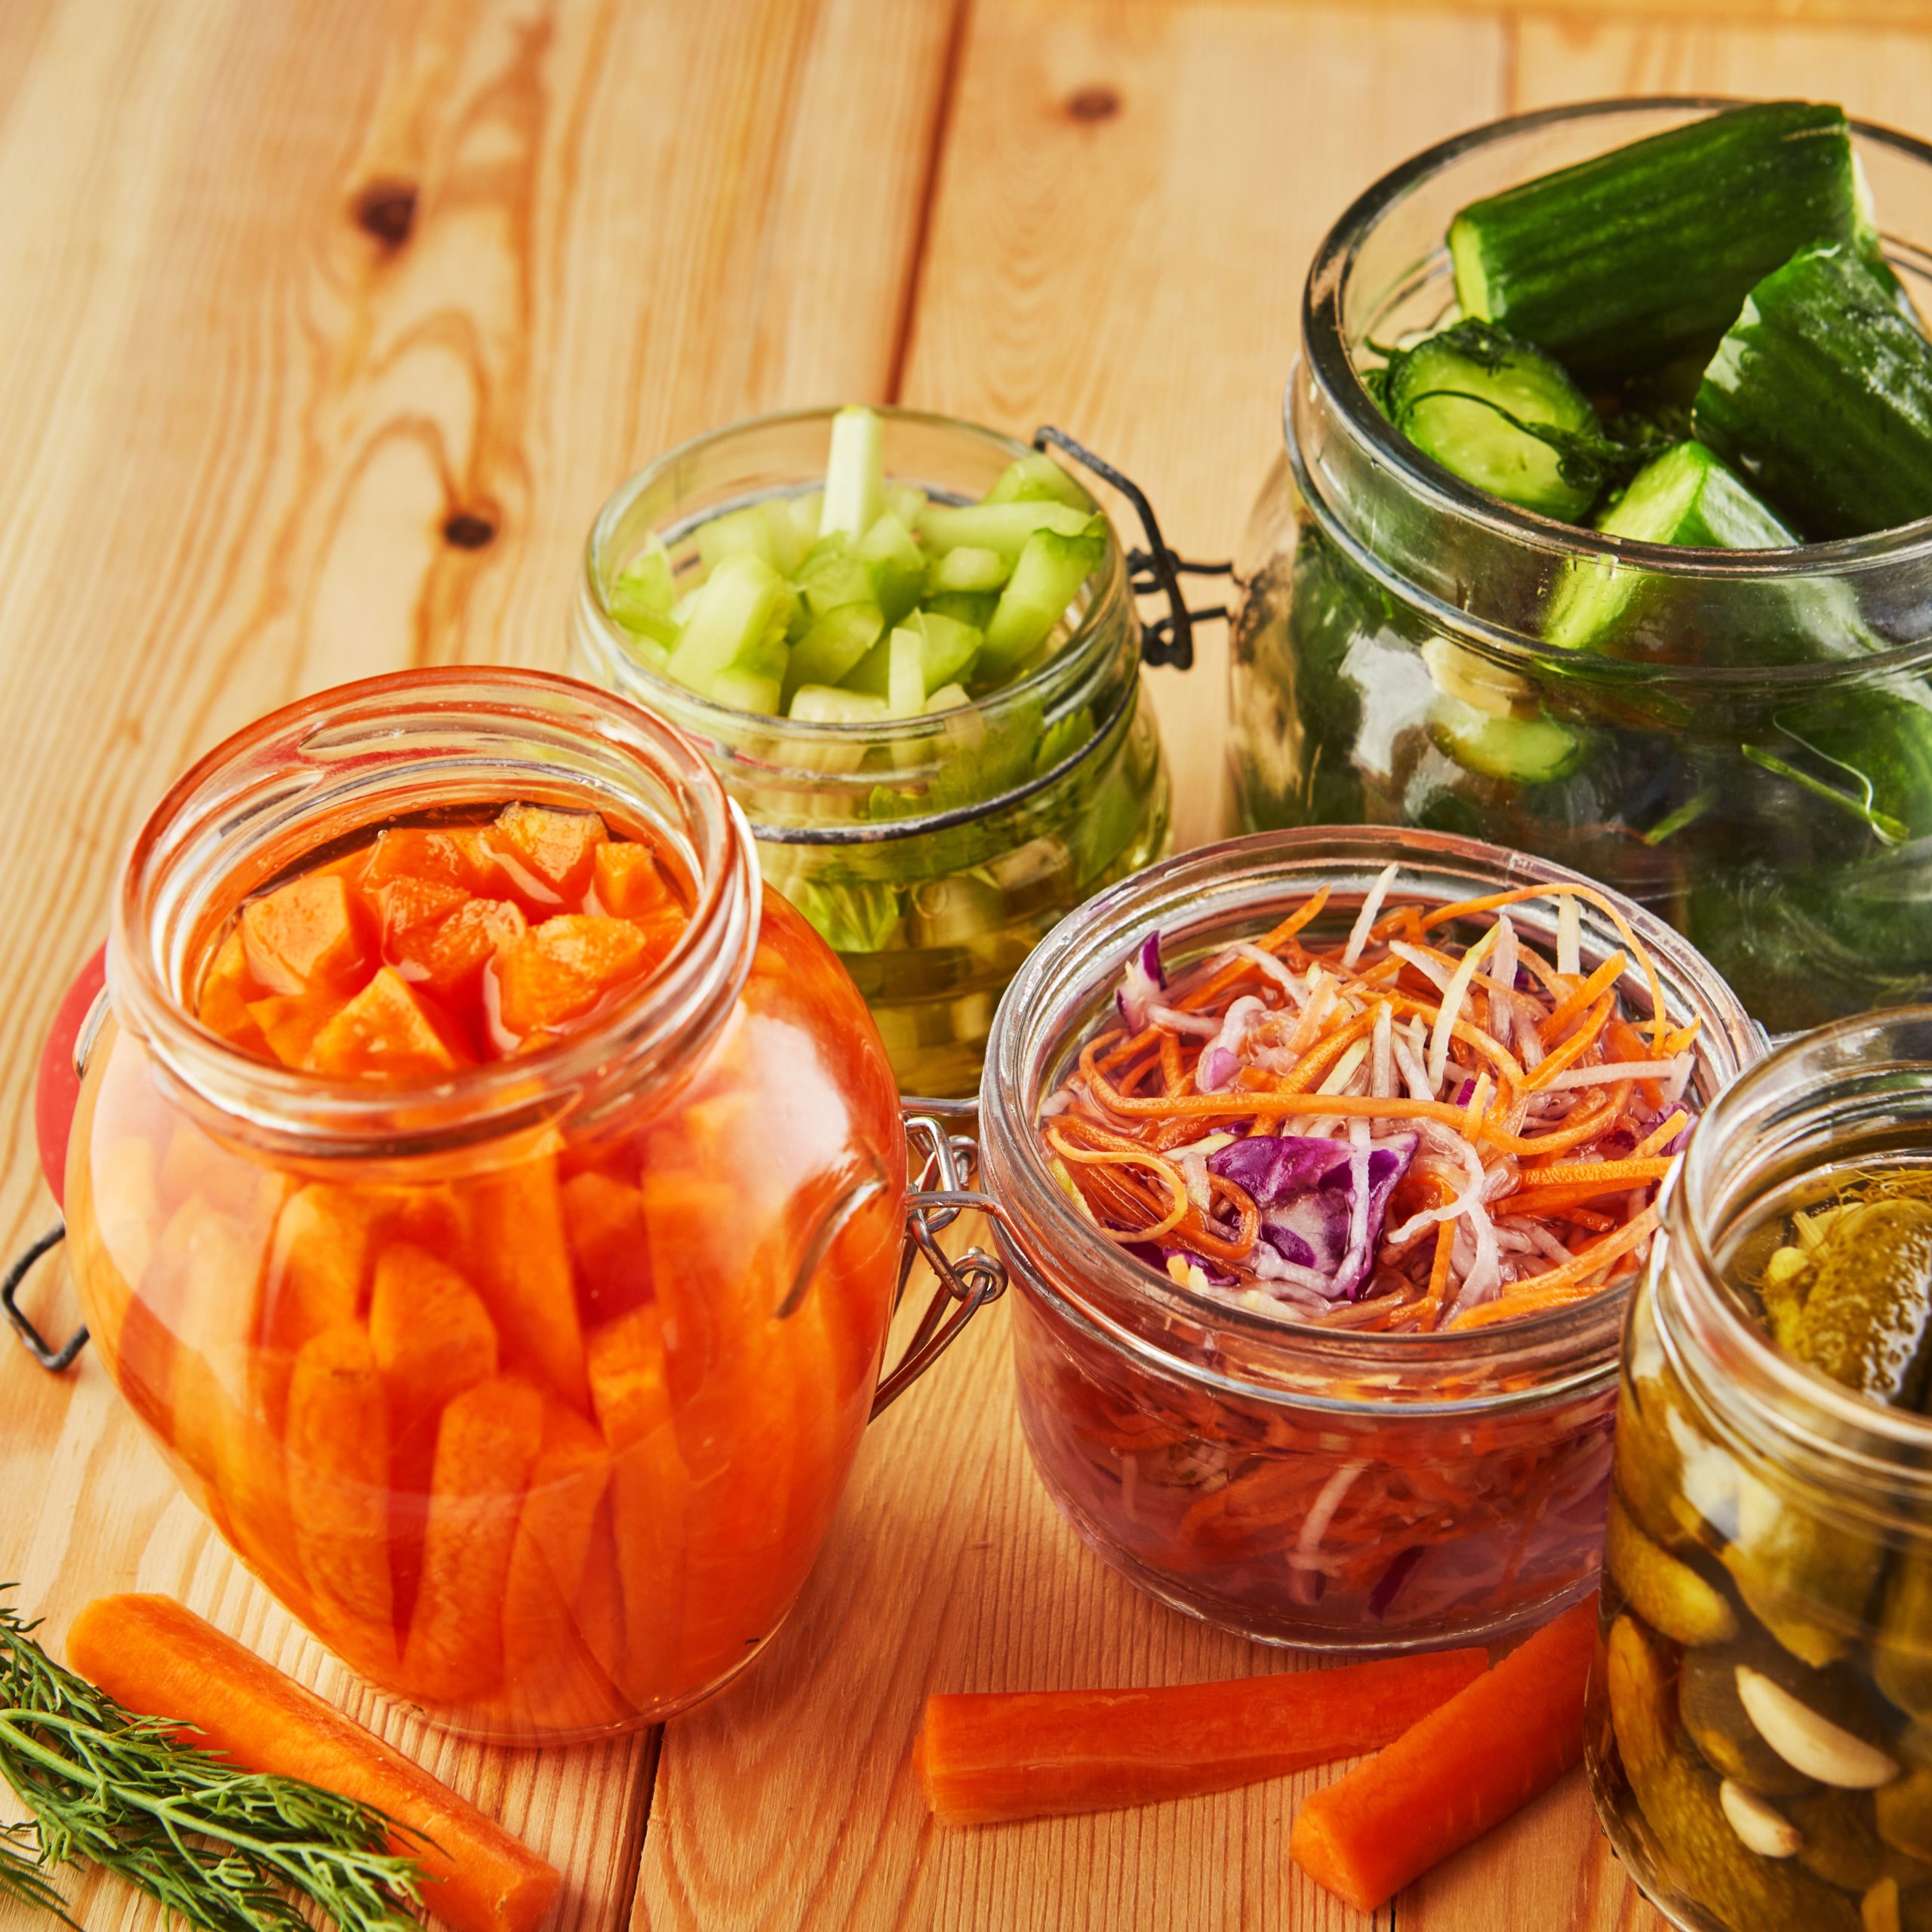 What Are Fermented Foods? (Plus 10 That are Amazing for You!)